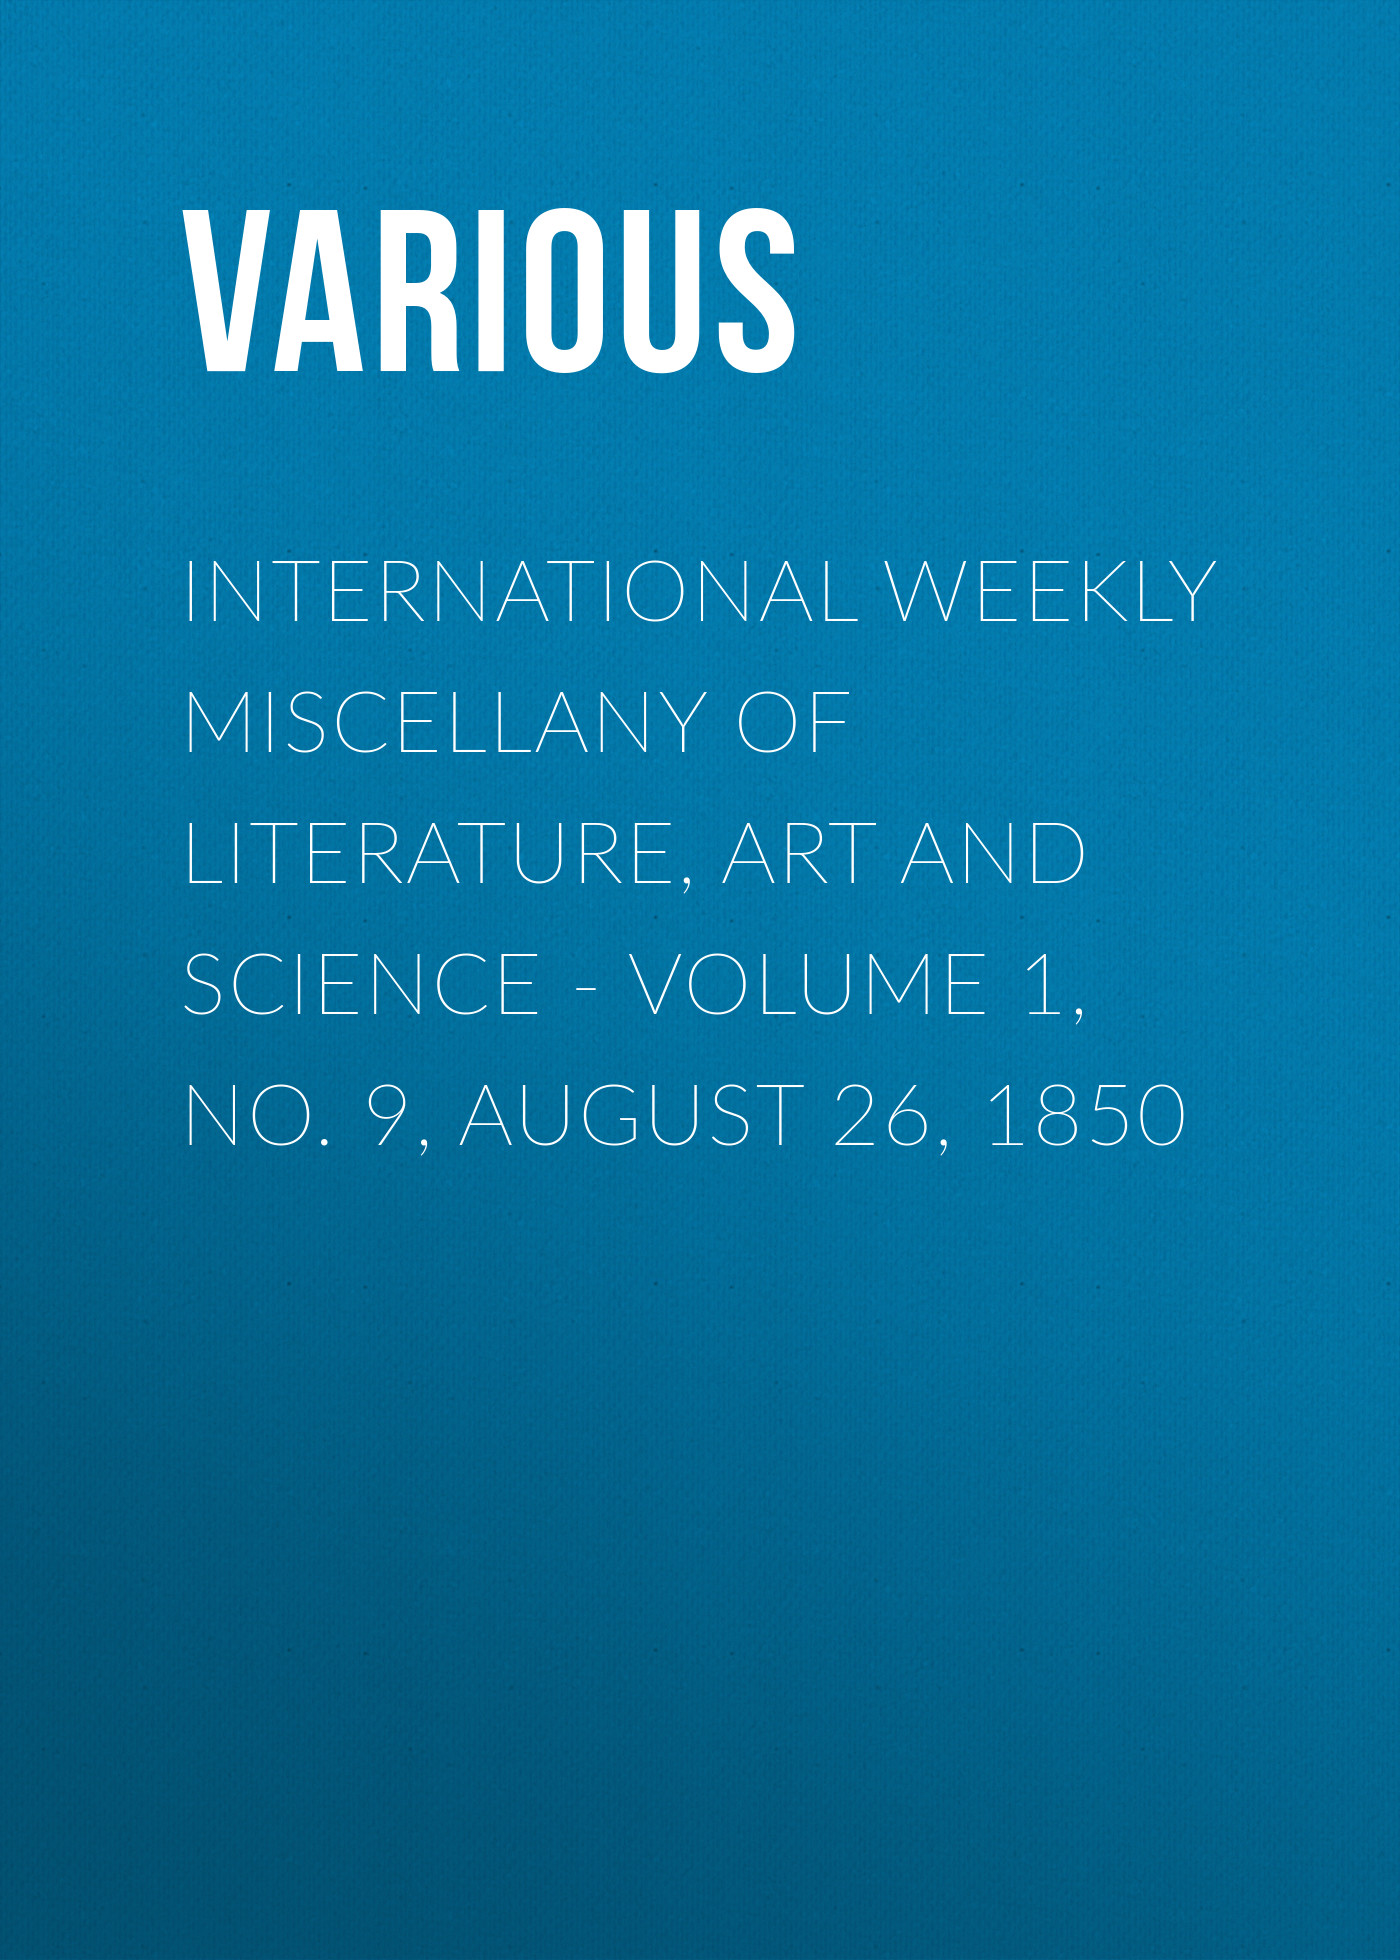 International Weekly Miscellany of Literature, Art and Science - Volume 1, No. 9, August 26, 1850